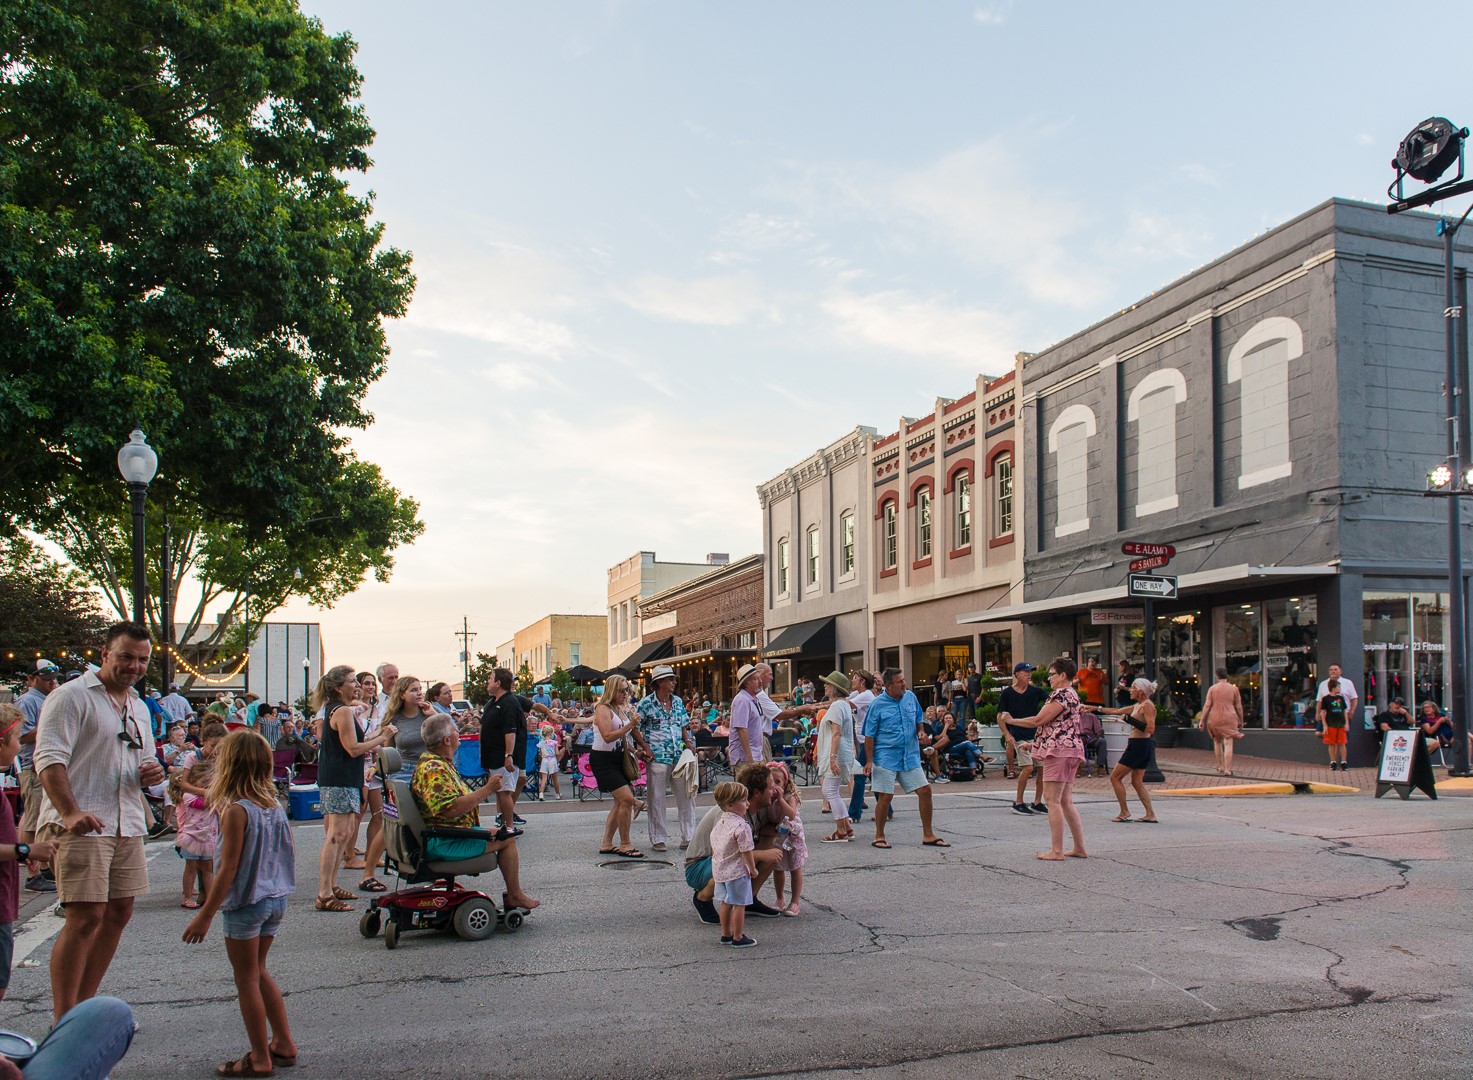 Many people gathered on the streets of downtown Brenham for Hot Nights Cool Tunes